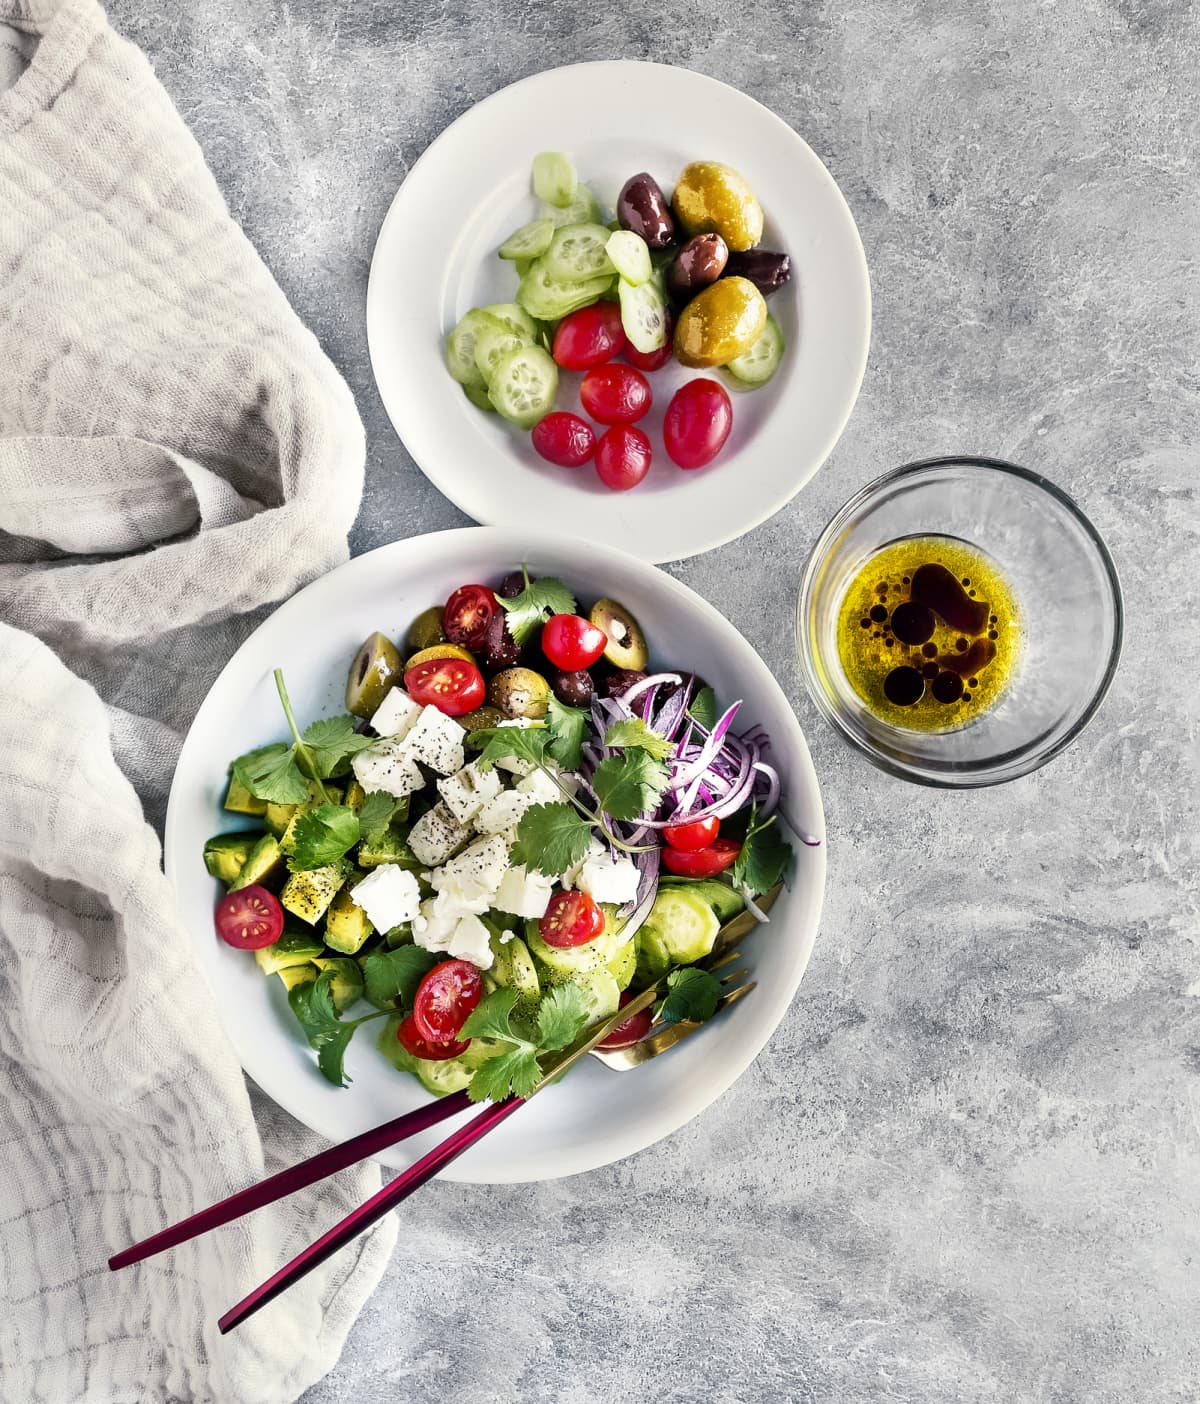 Bowl of fresh salad with feta served on table